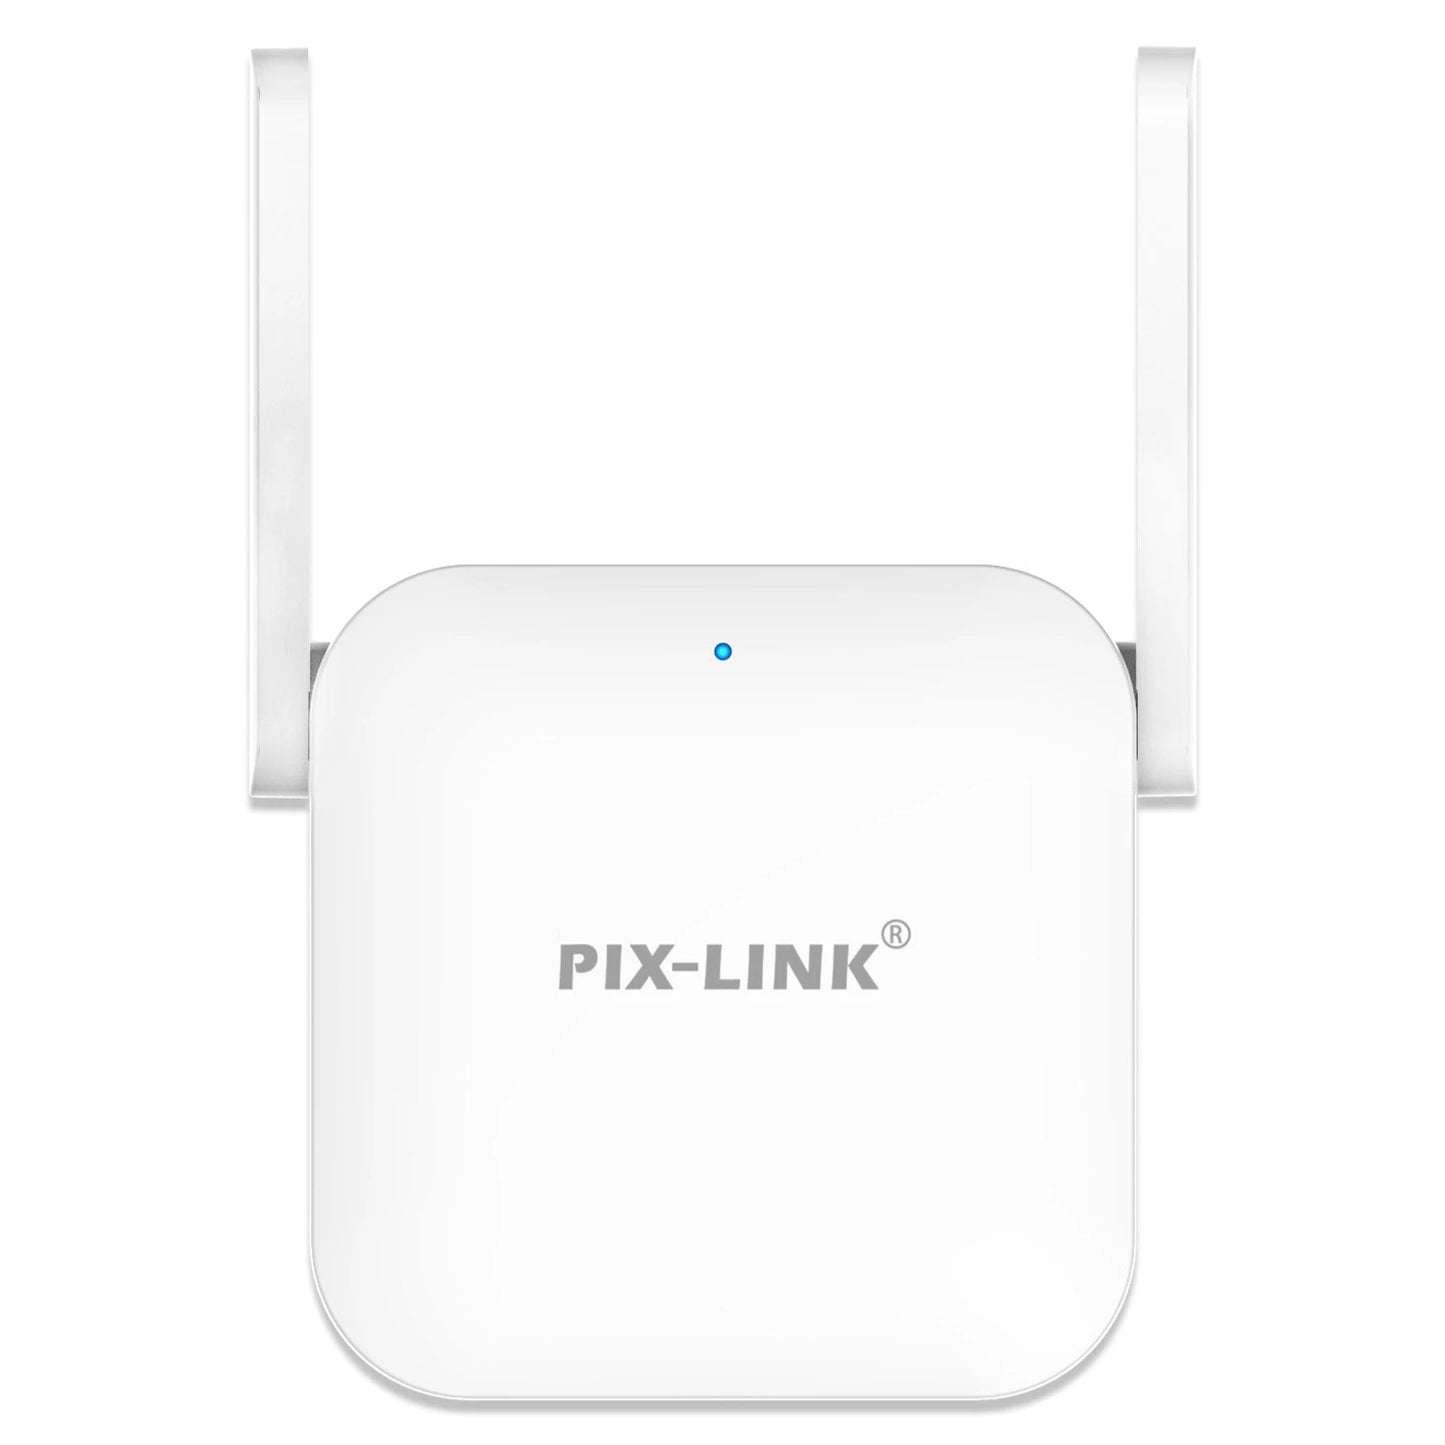 PIX-LINK – Pro Wi-Fi Repeater, 300 mbps